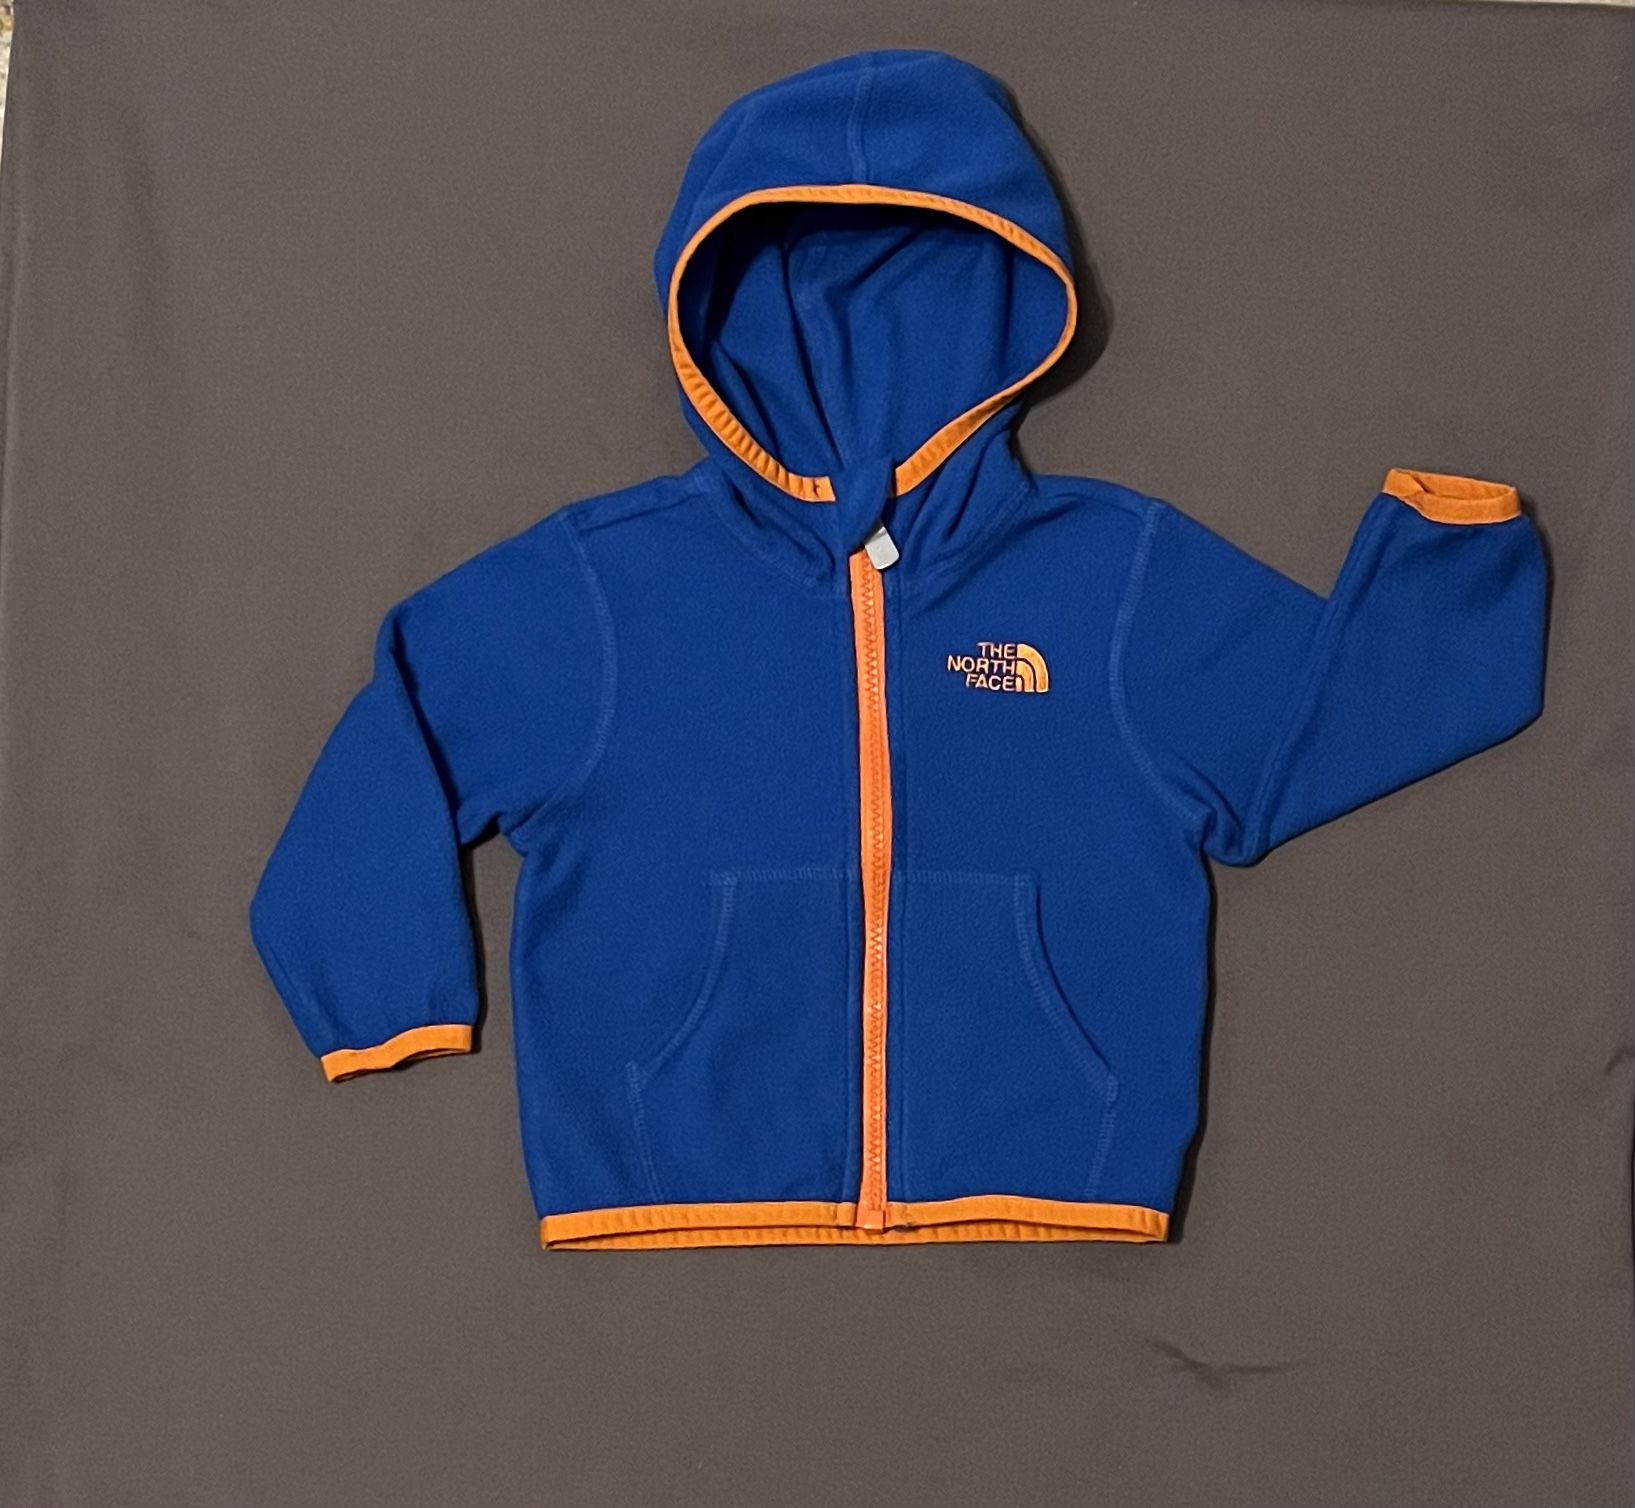 The North Face Fleece Hooded Jacket 6-12 Months